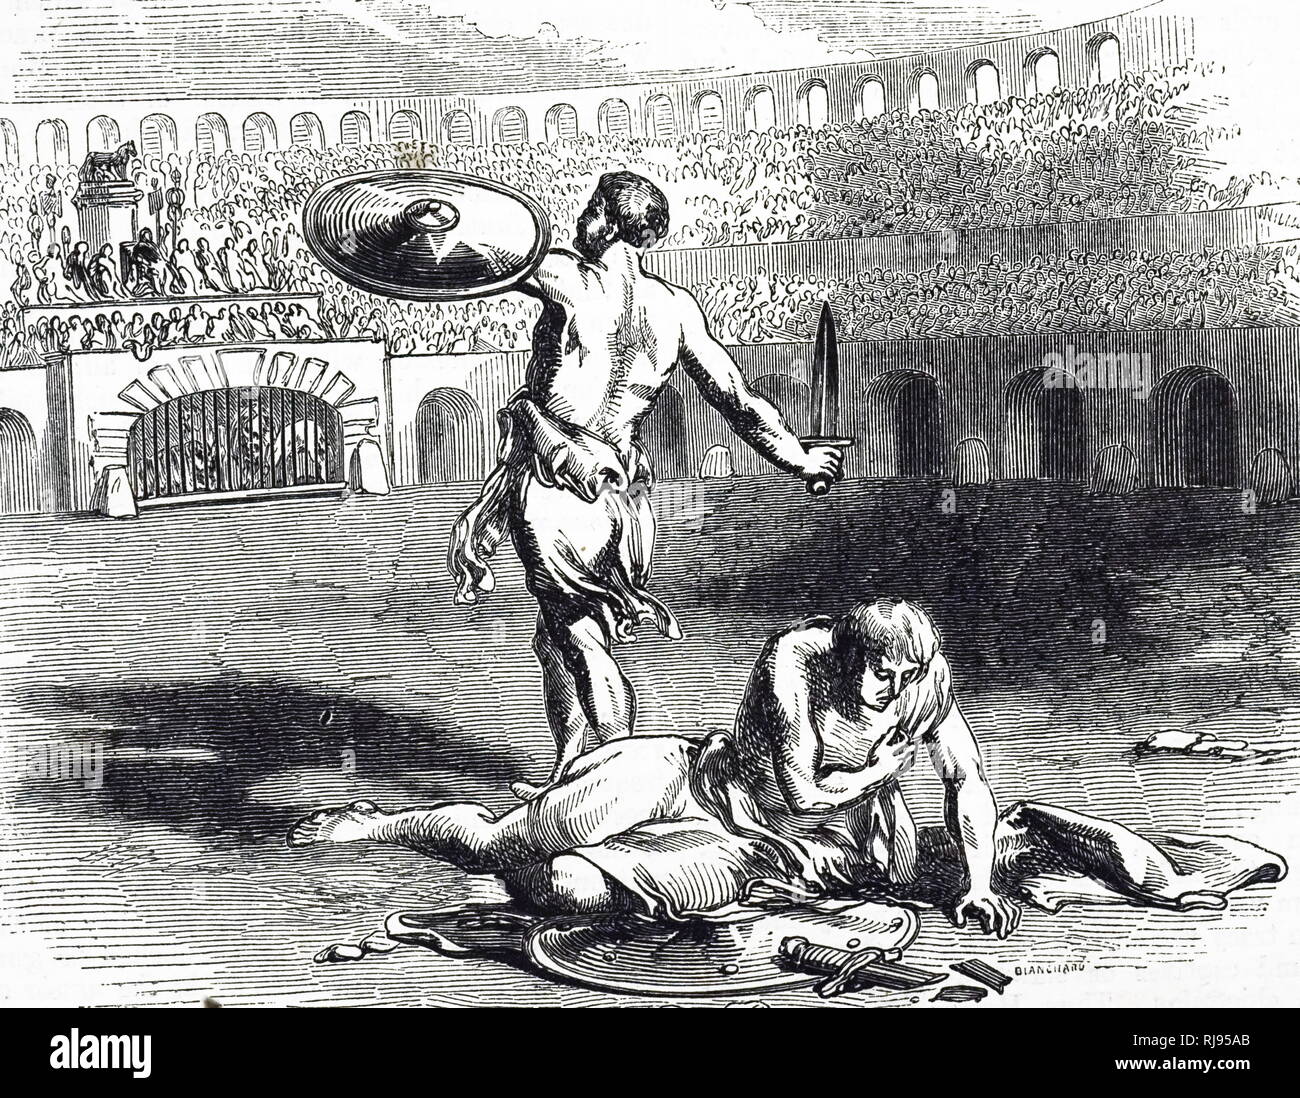 An engraving depicting Gladiators fighting in the Colosseum, in Ancient Rome. Dated 19th century Stock Photo